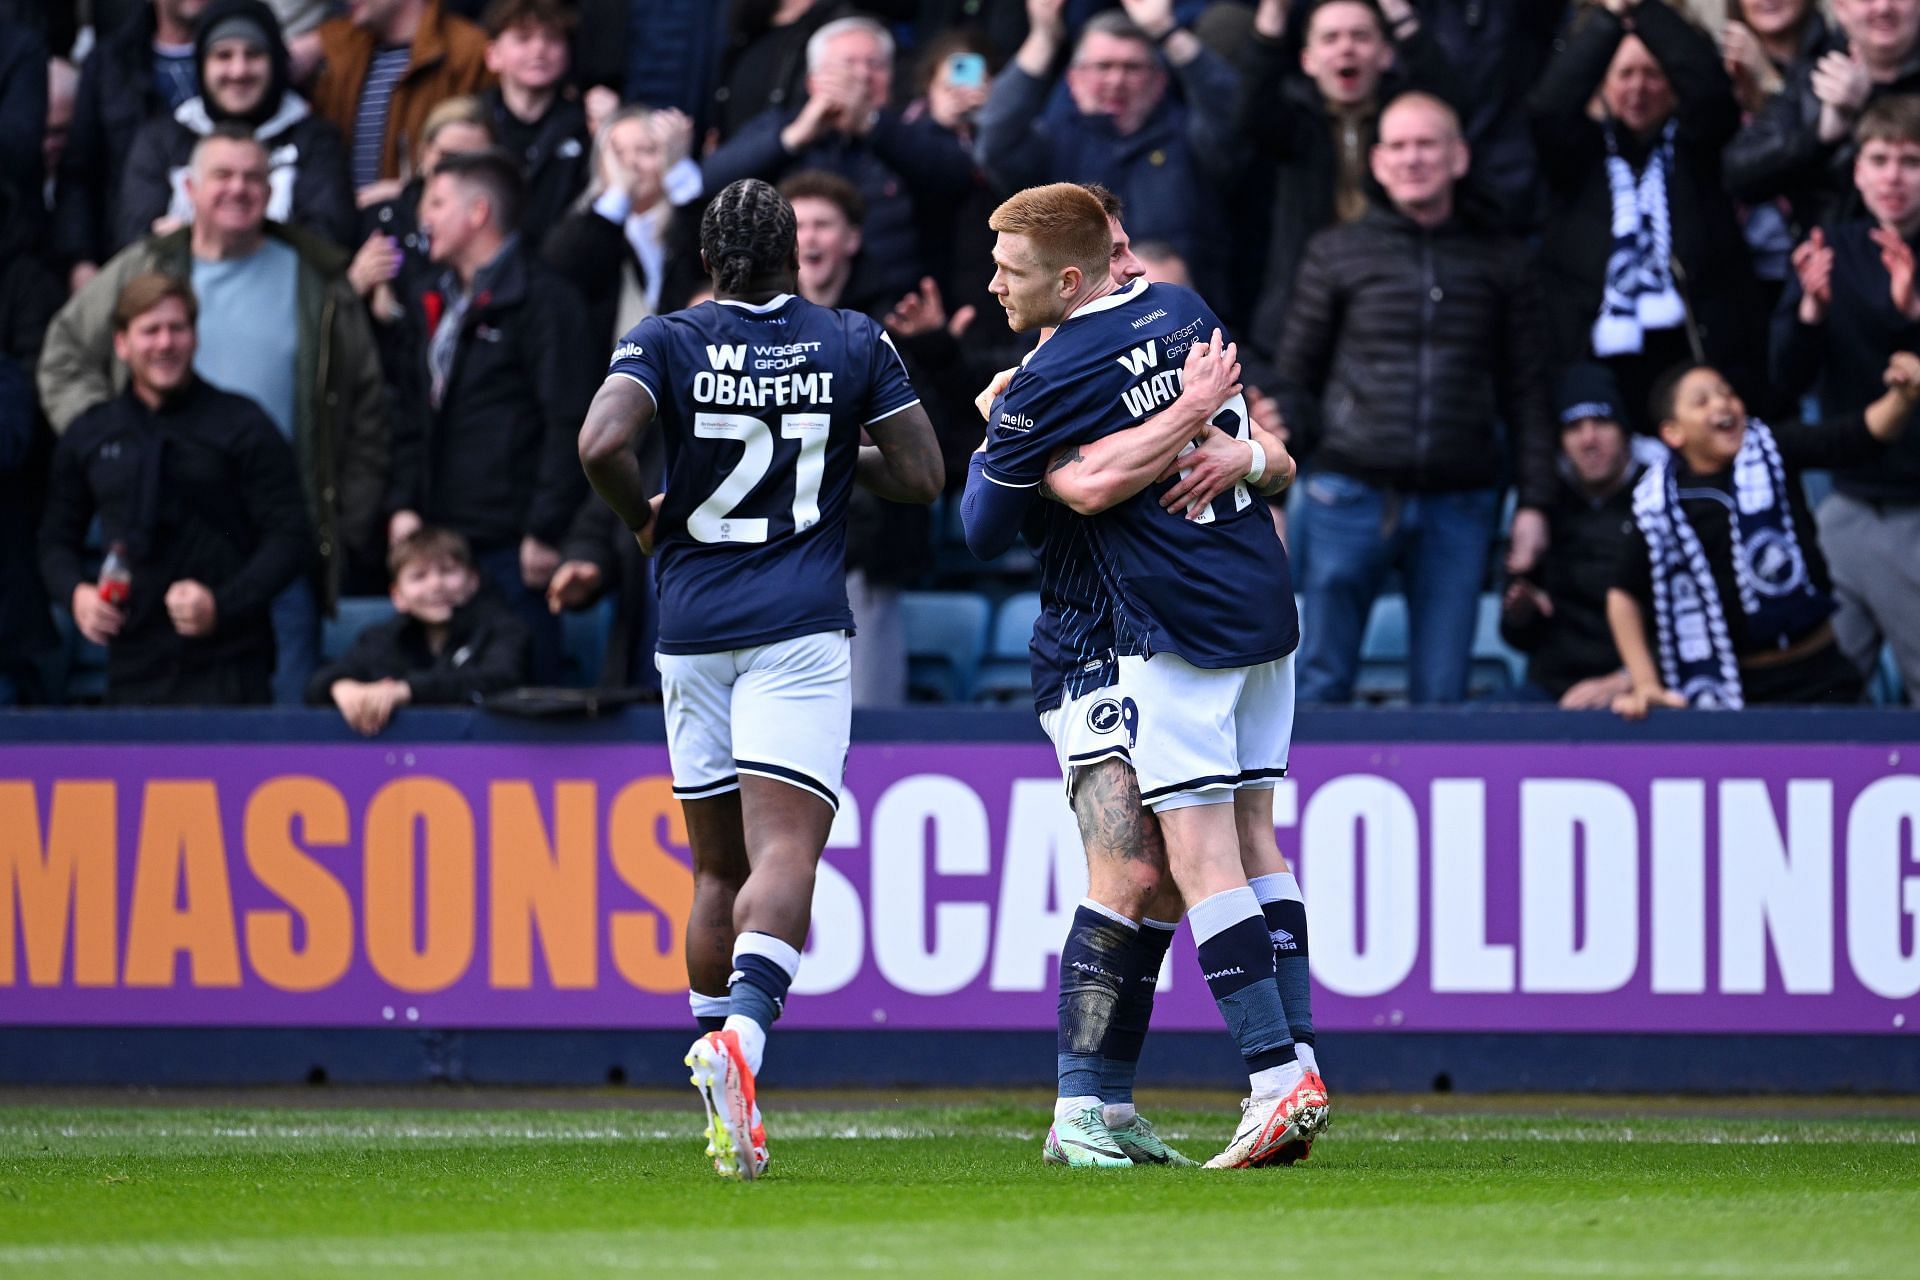 Millwall v West Bromwich Albion - Sky Bet Championship